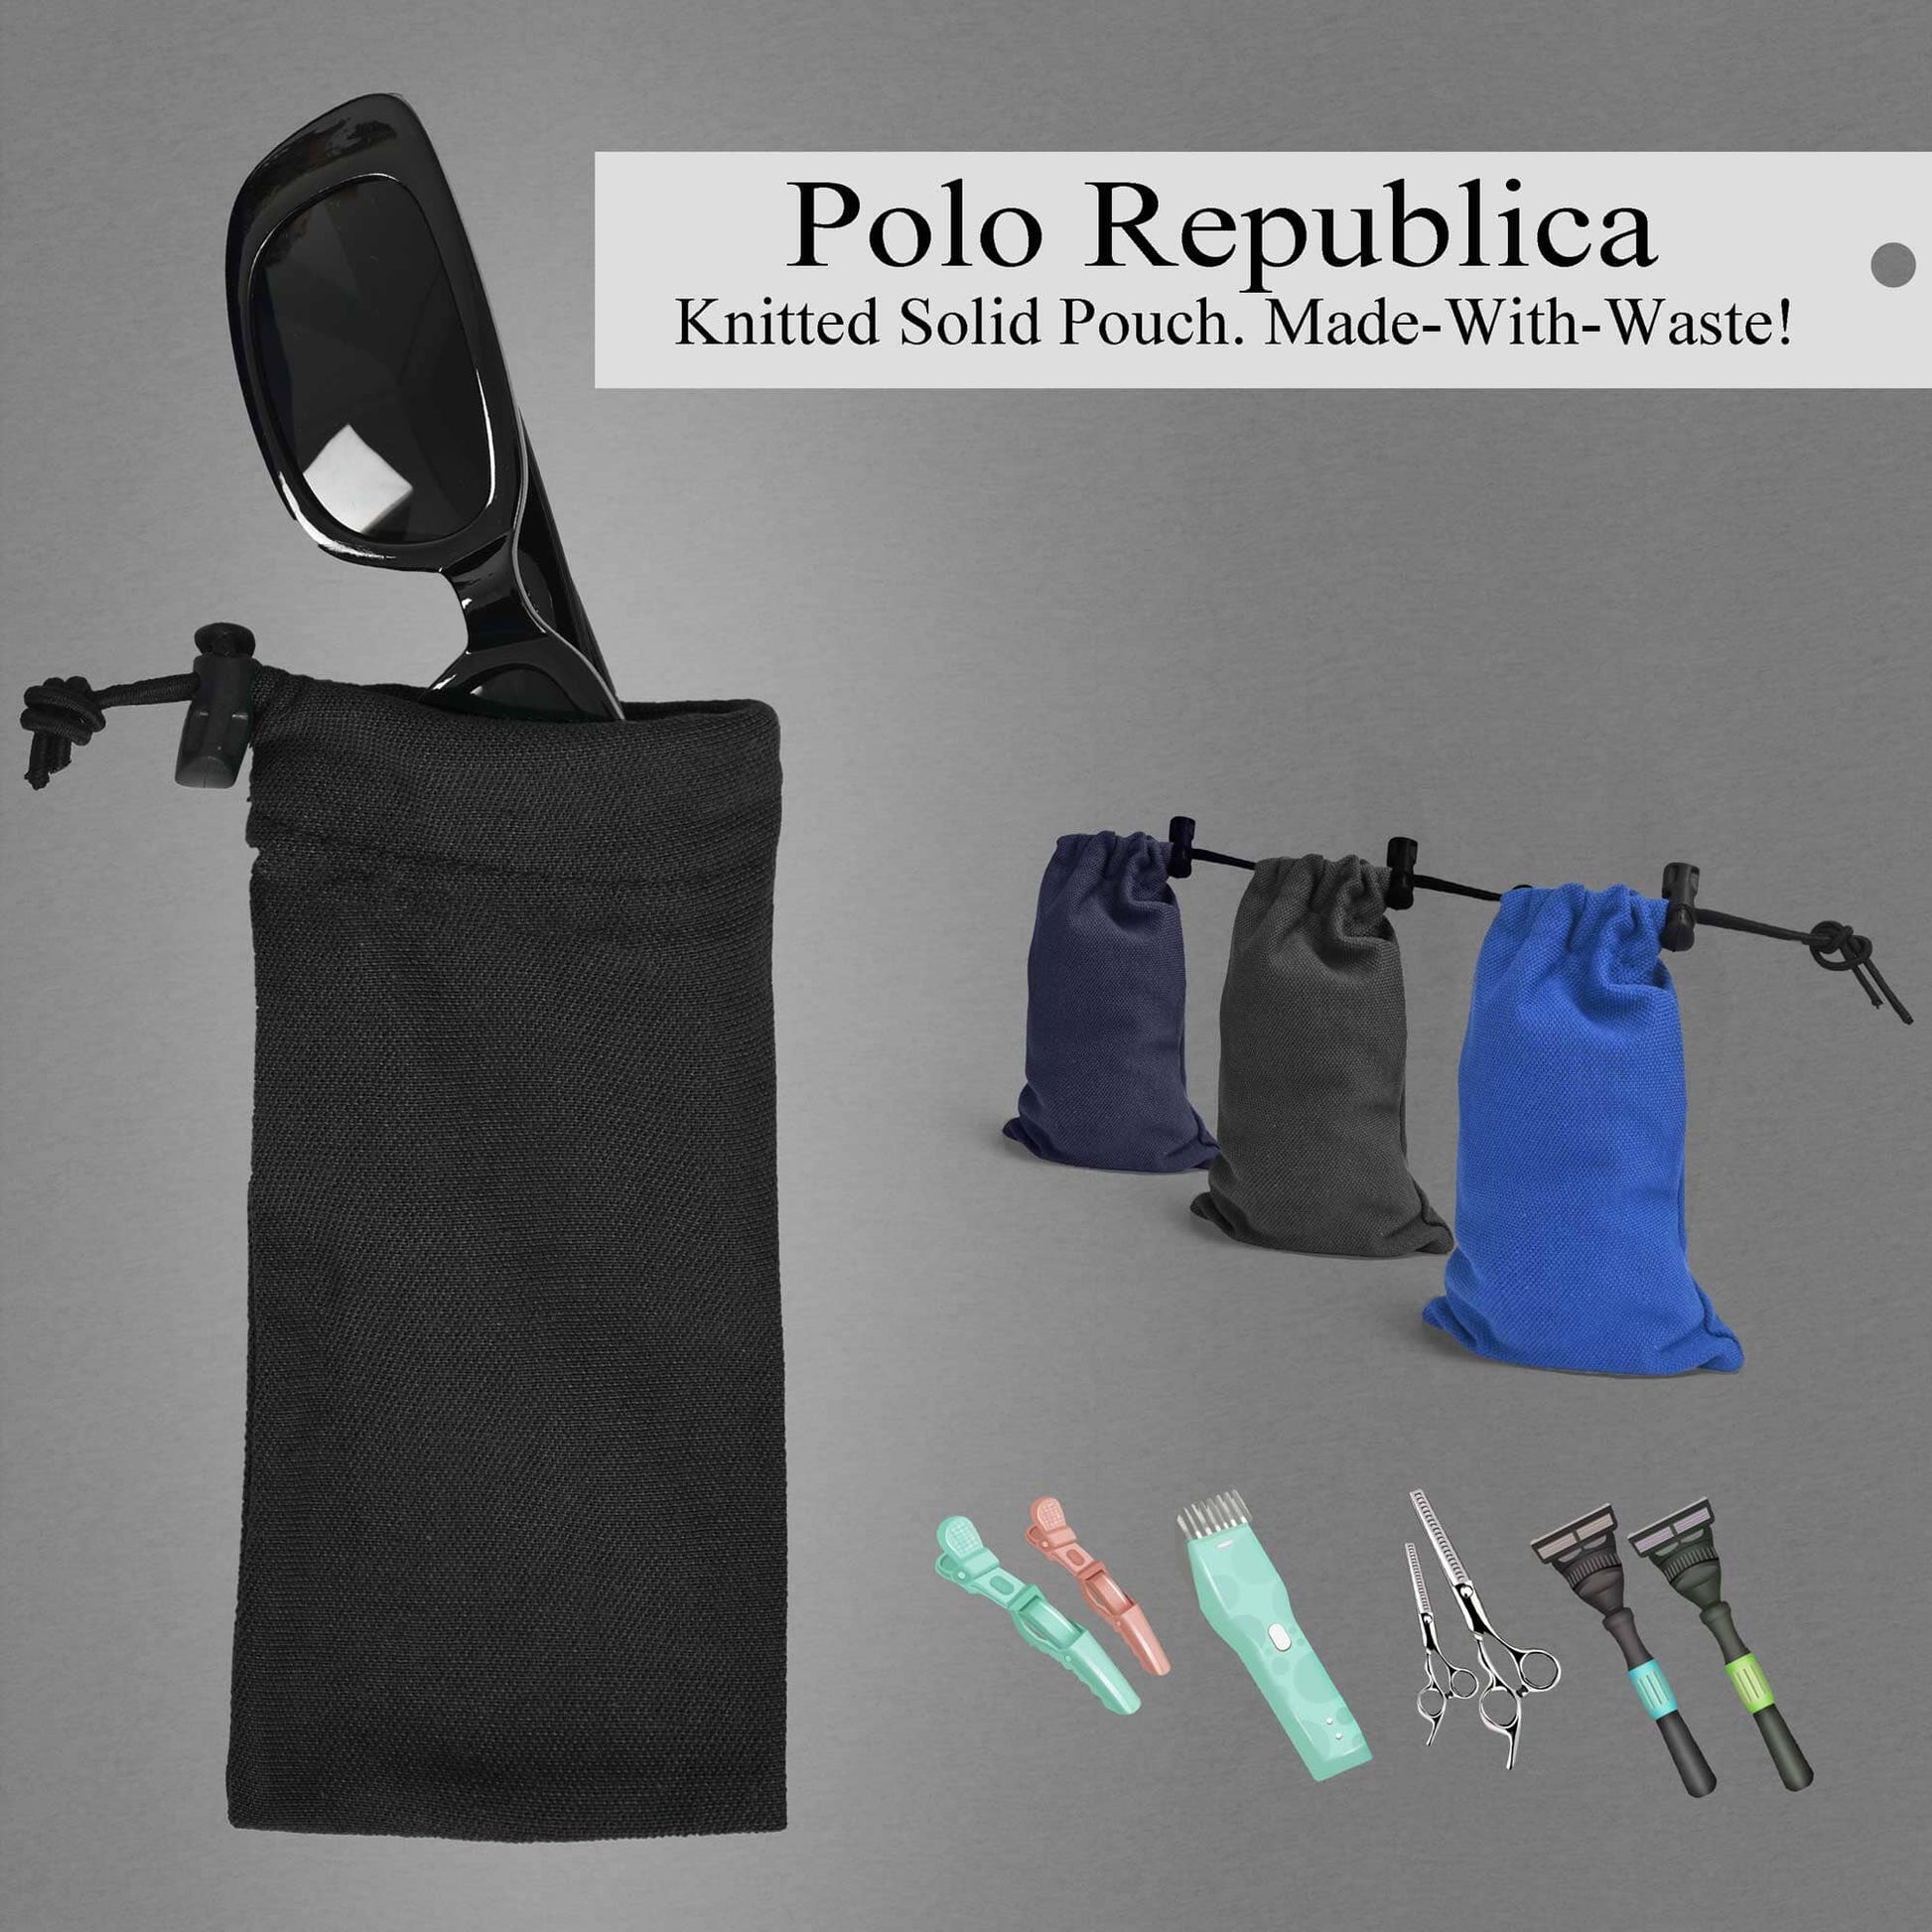 Polo Republica Knitted Pouch. Made-With-Waste! General Accessories Polo Republica 